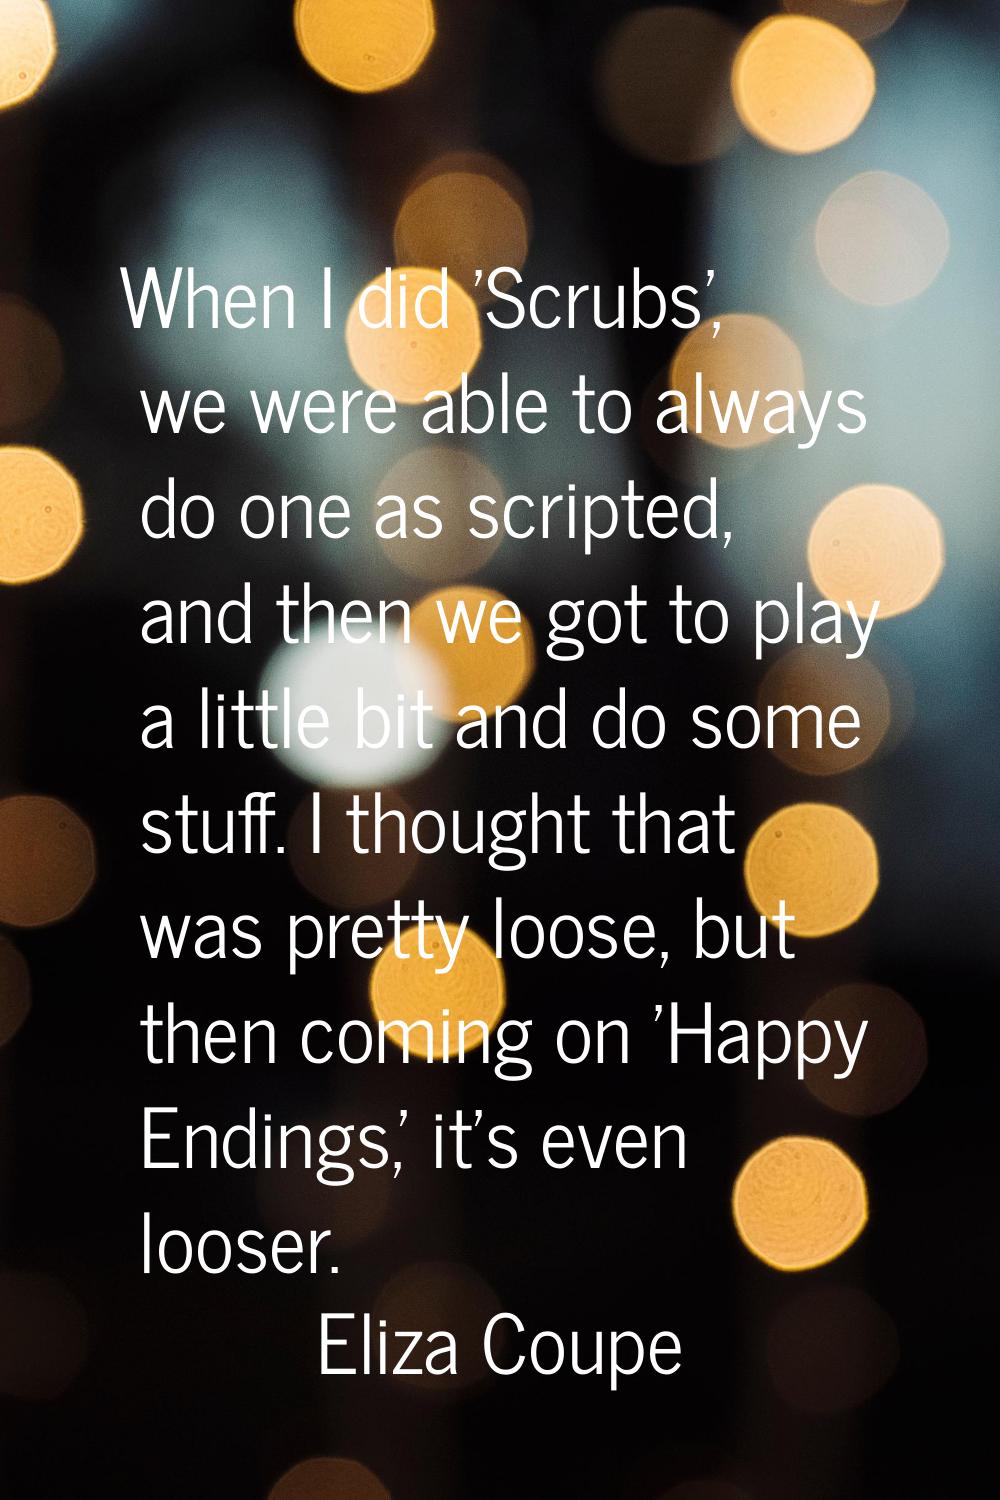 When I did 'Scrubs', we were able to always do one as scripted, and then we got to play a little bi